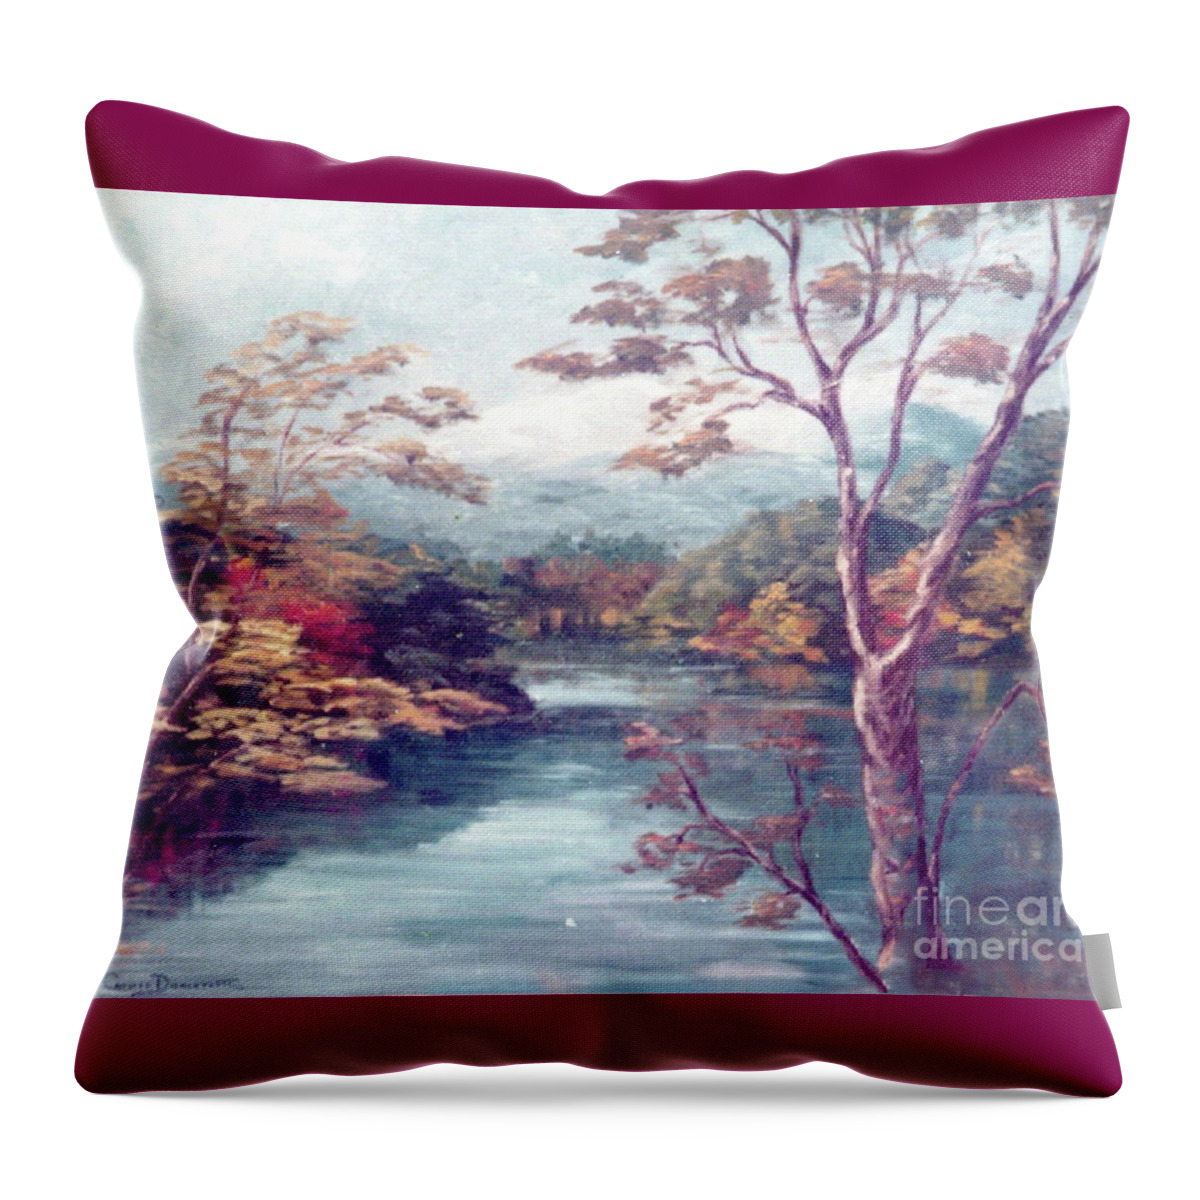 Water Throw Pillow featuring the painting Mountain Lake in Autumn by Catherine Ludwig Donleycott